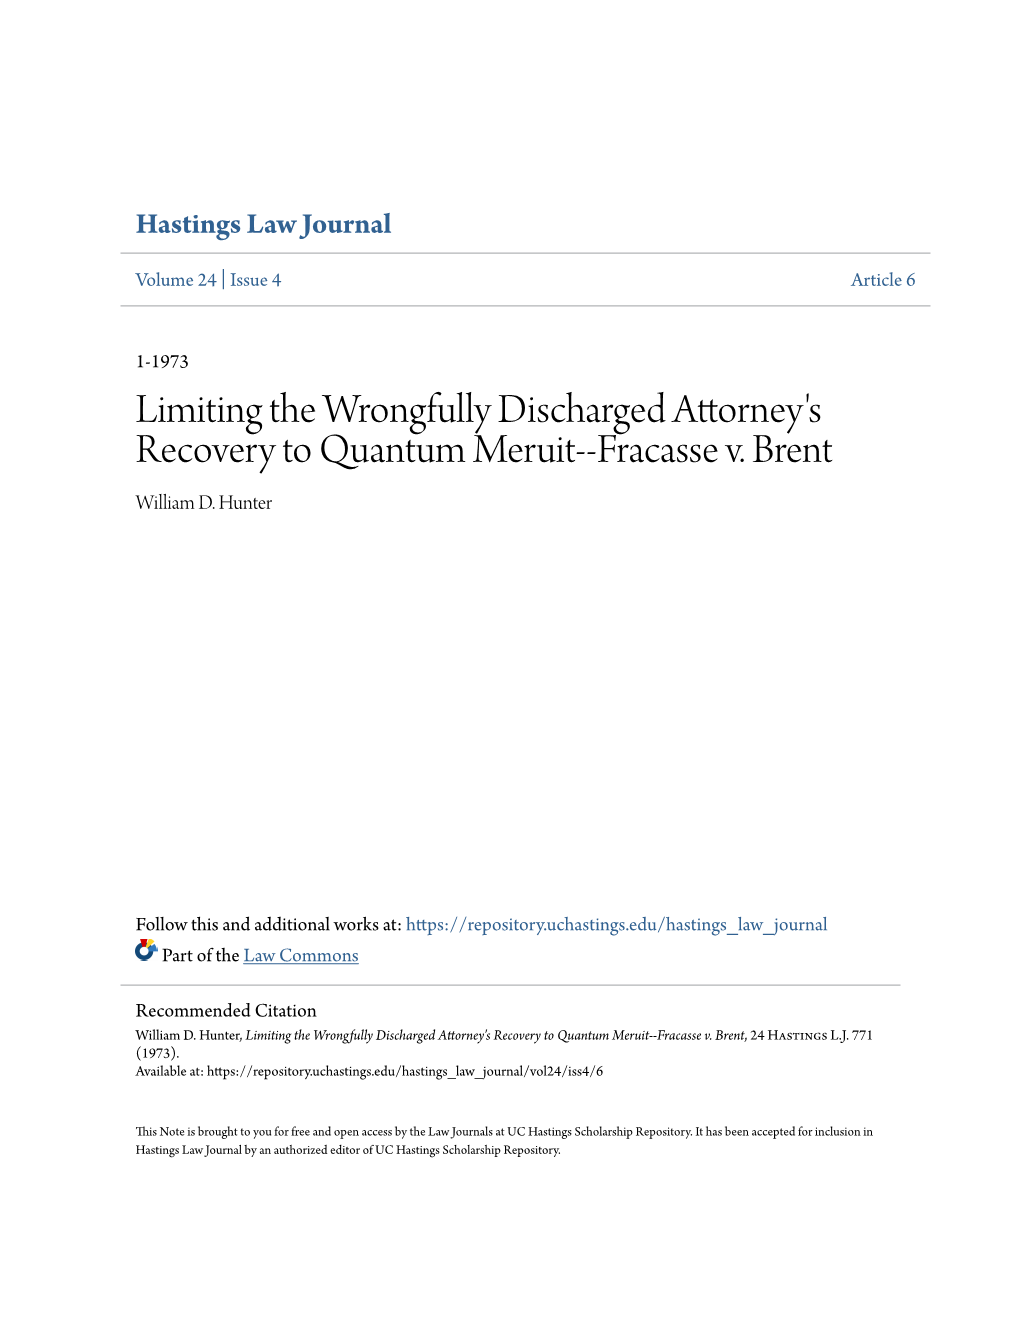 Limiting the Wrongfully Discharged Attorney's Recovery to Quantum Meruit--Fracasse V